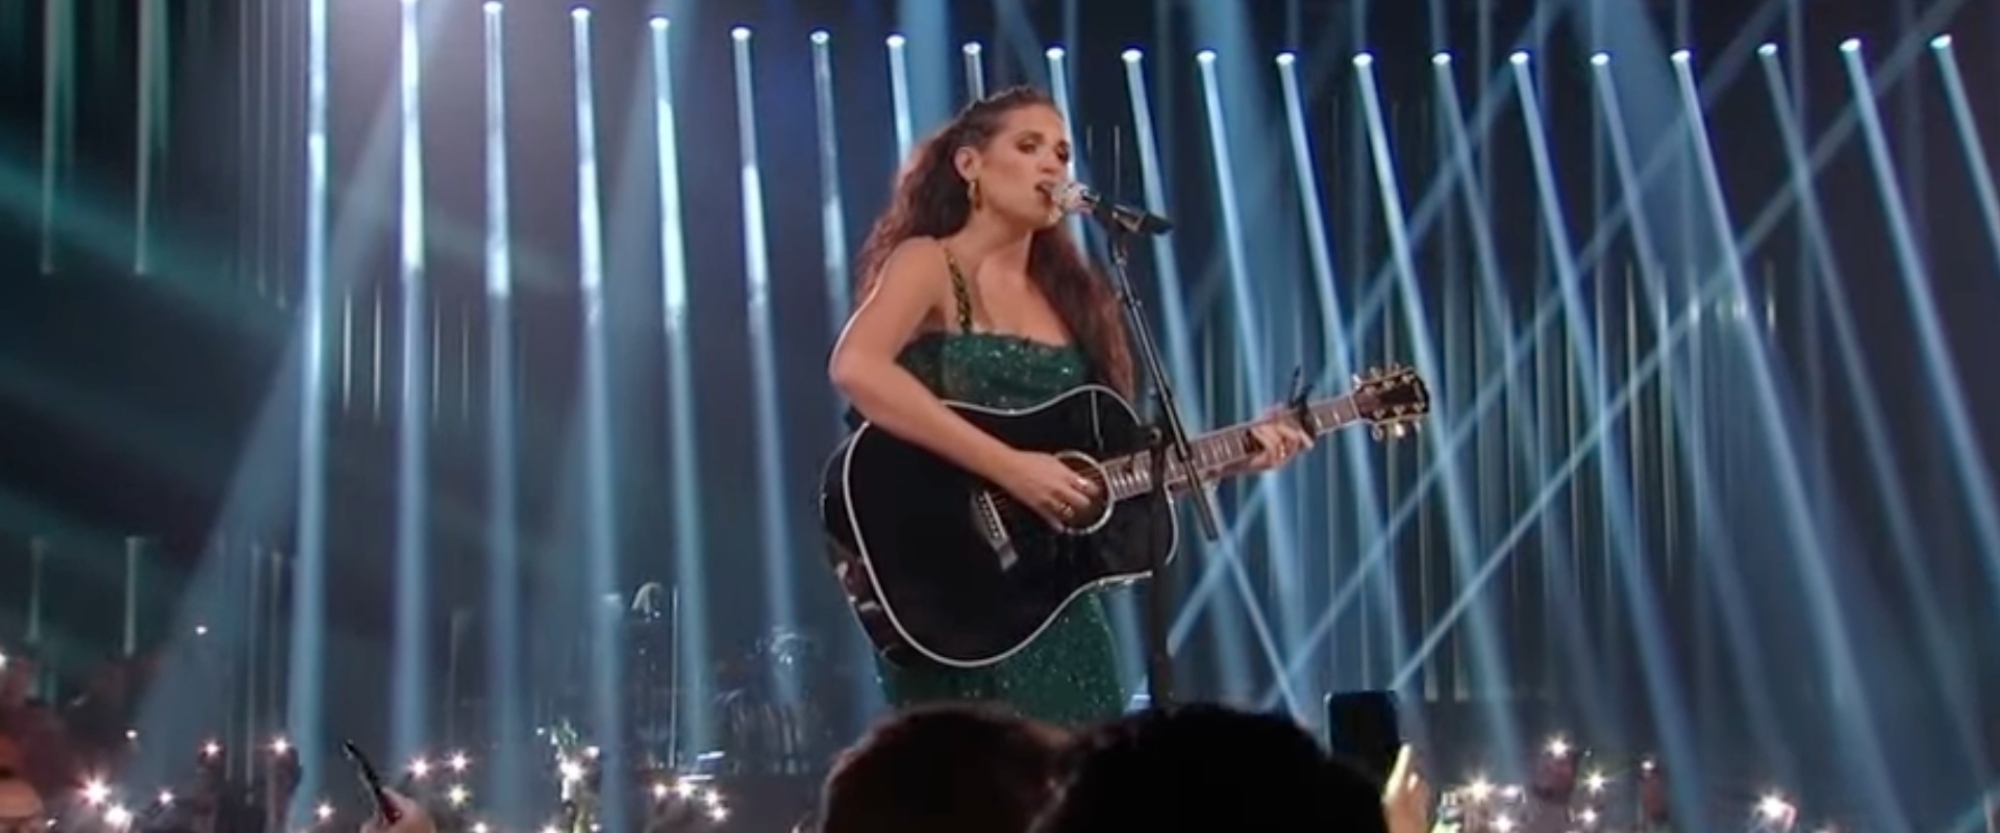 McKenna Faith Breinholt Returns to ‘American Idol’ Stage With Acoustic Version of “Make You Feel My Love”